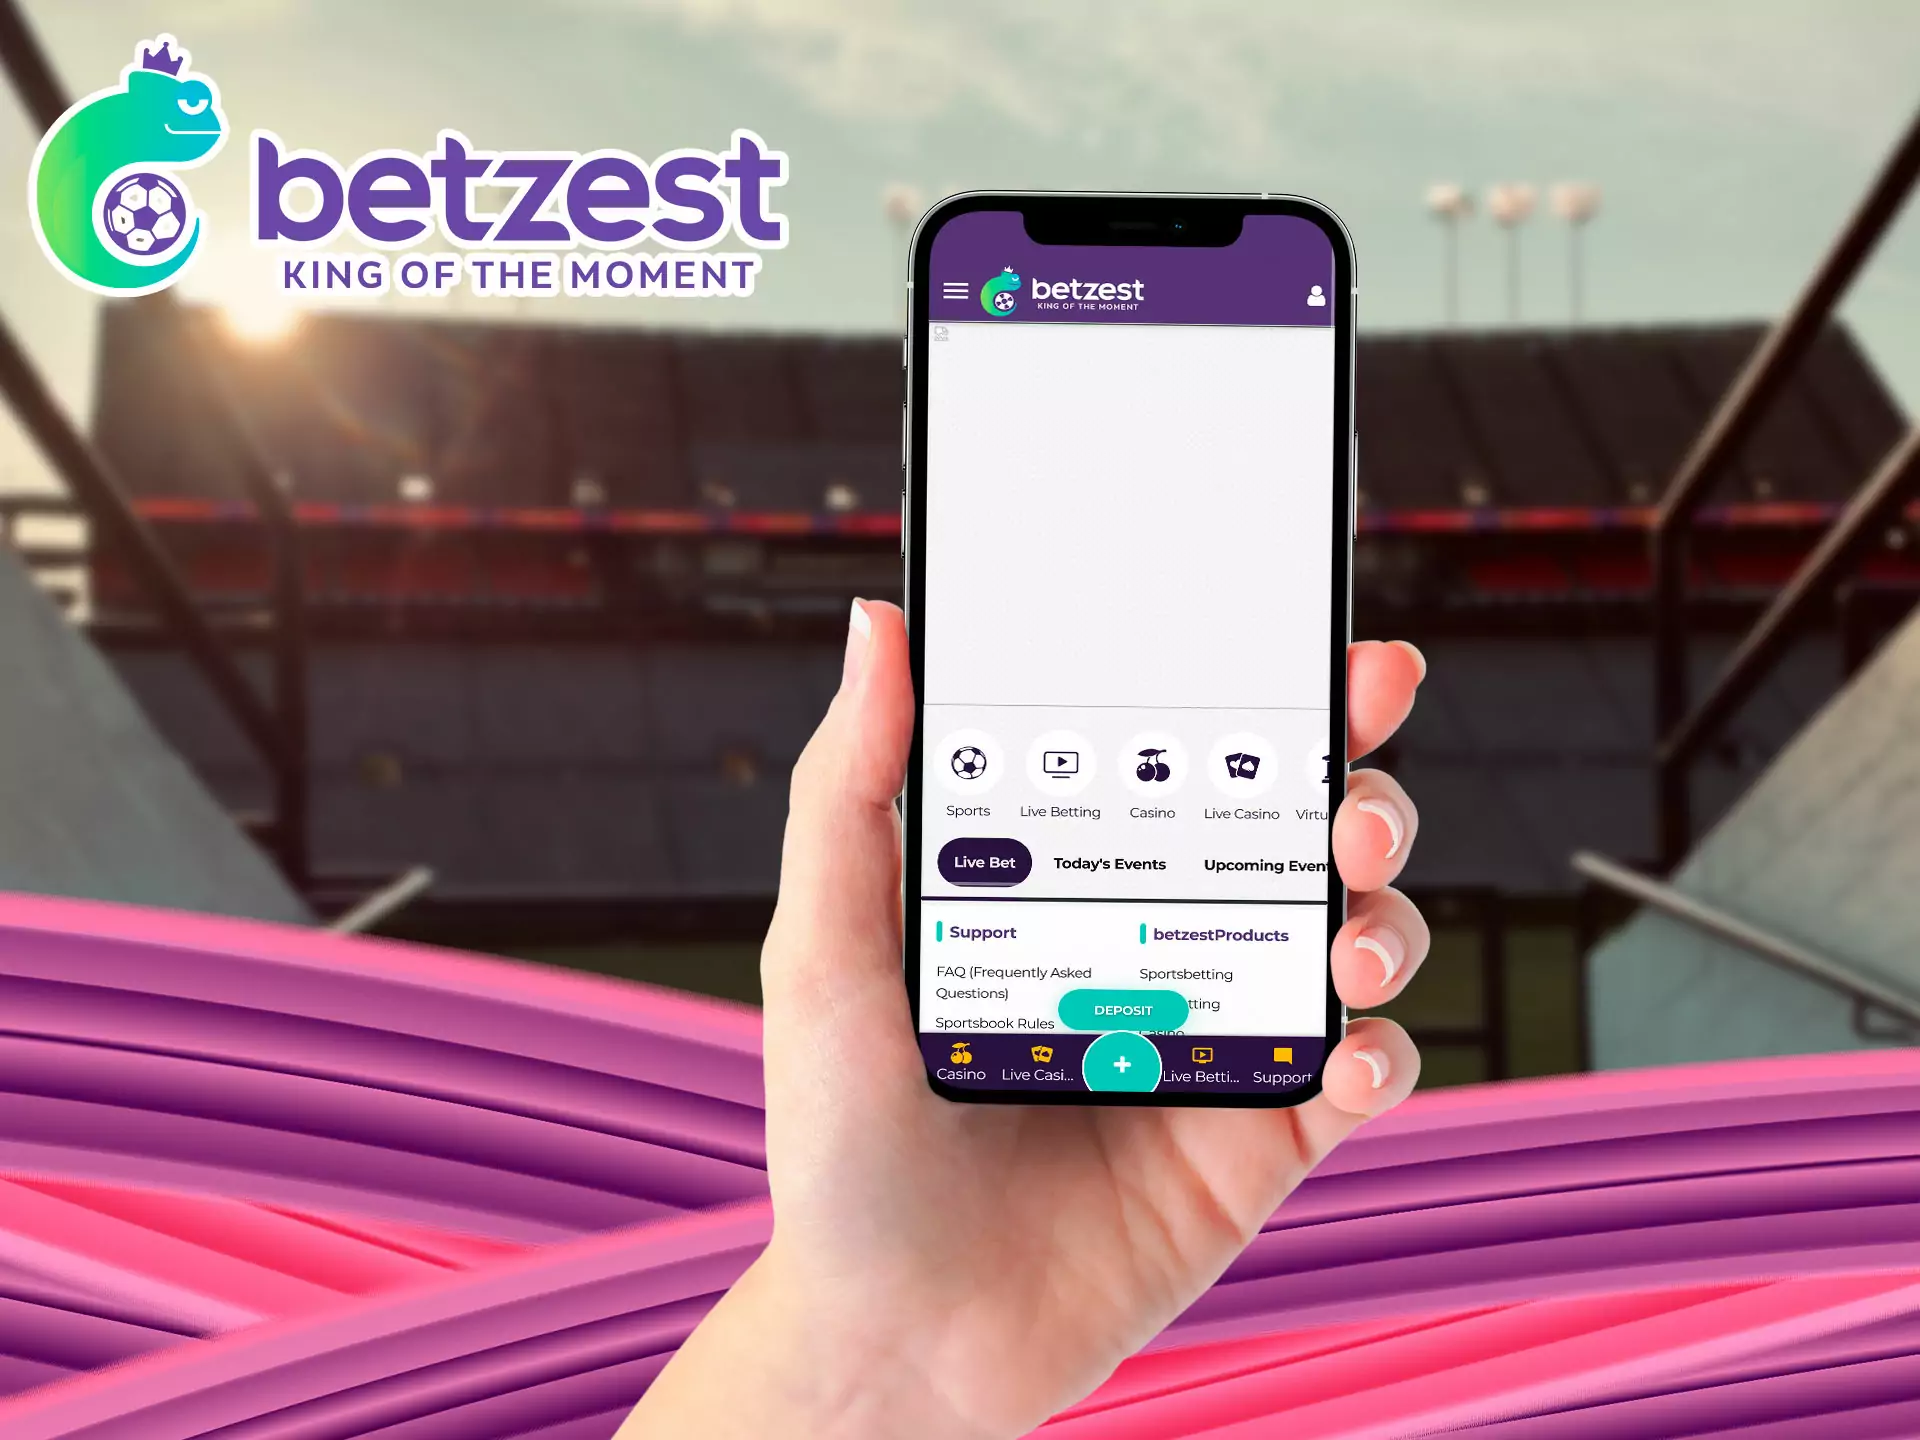 A lot of game types are waiting for you in the Betzest app.